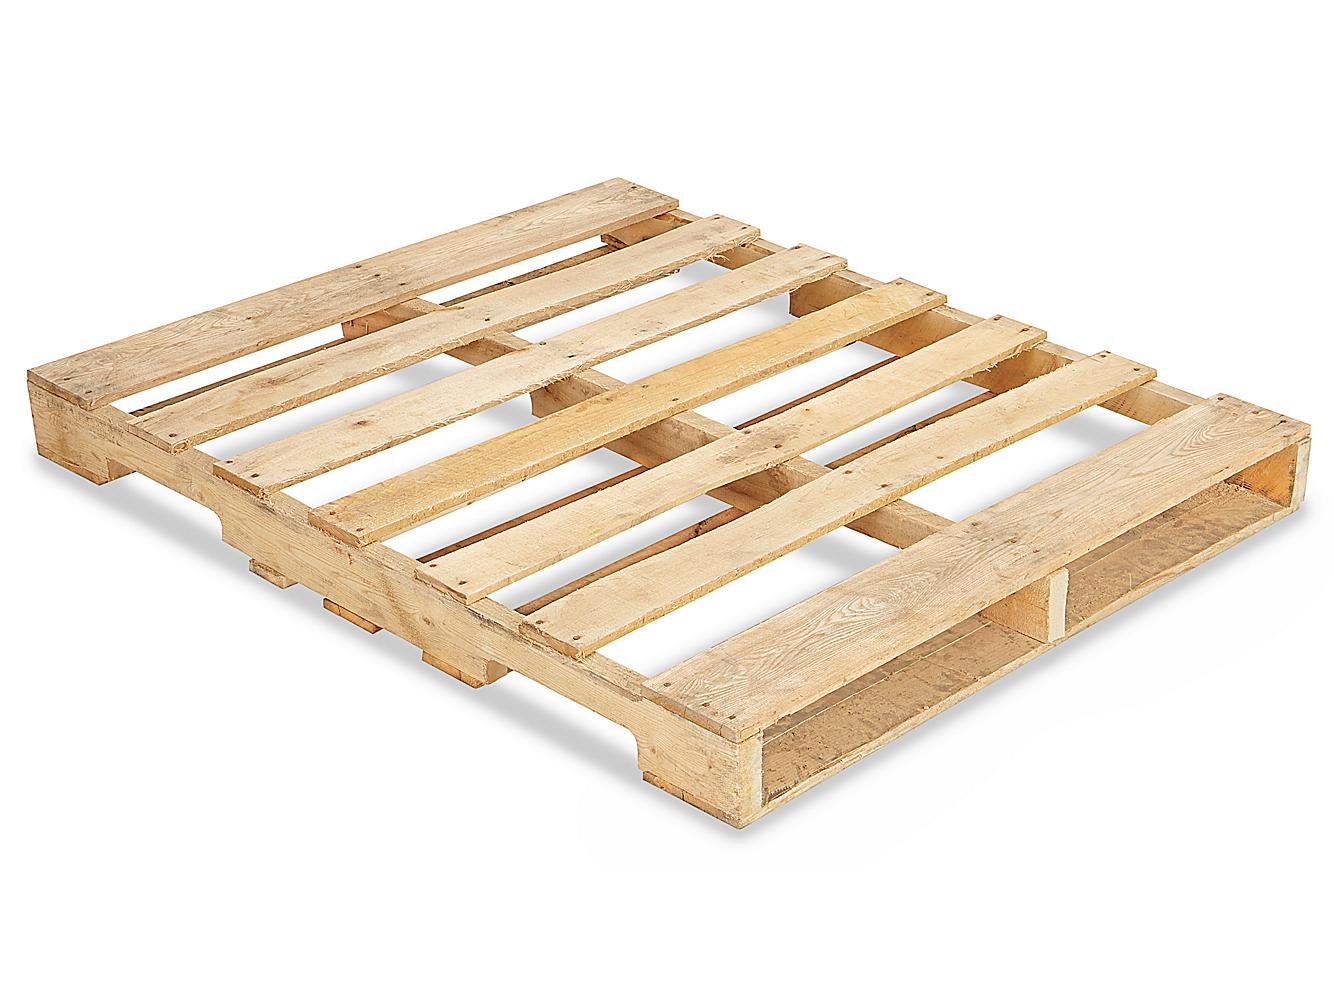 Heat Treated Pallets, Recycled Wood Pallets in Stock 